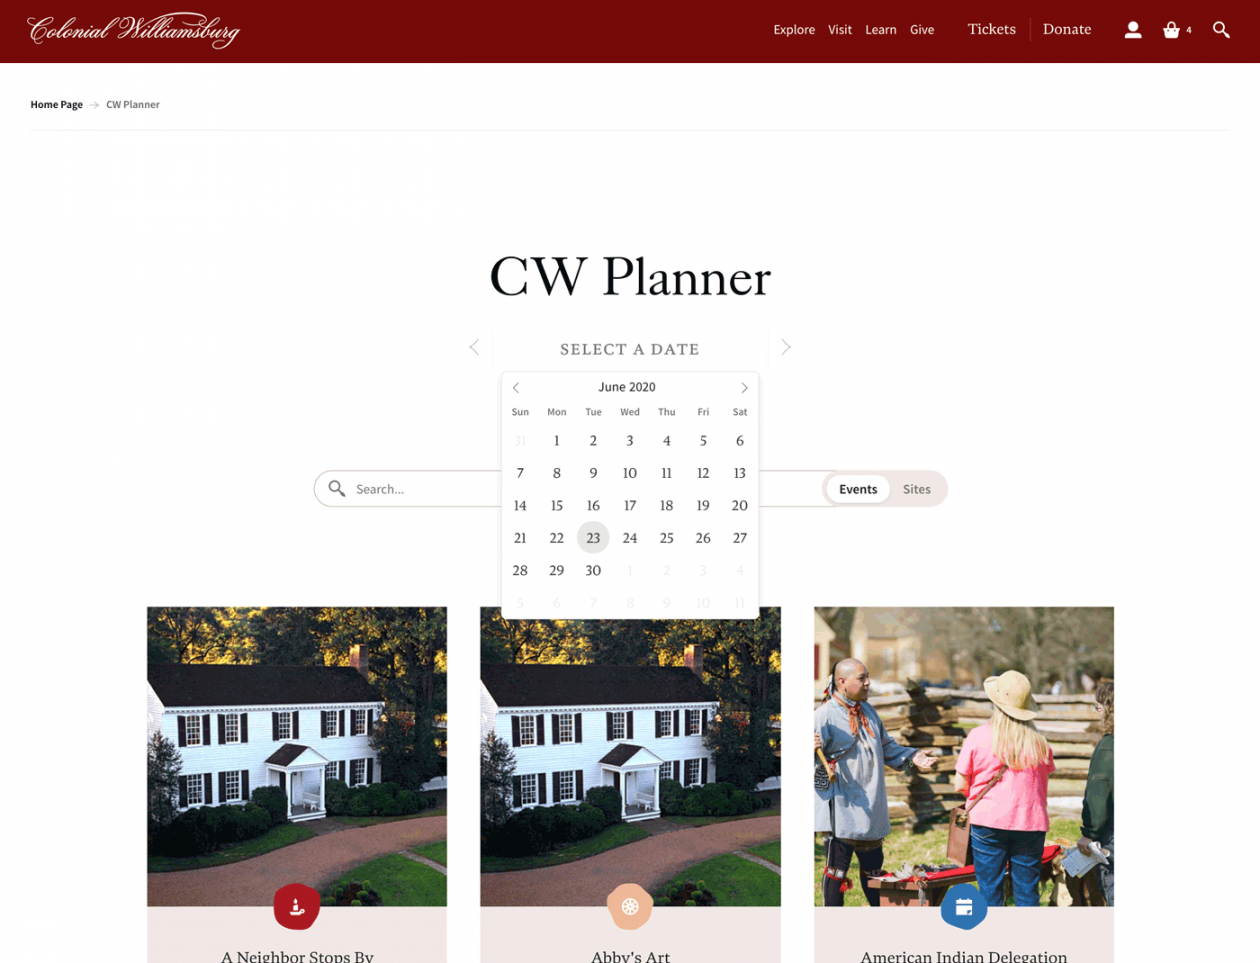 How to Use the CW Planner